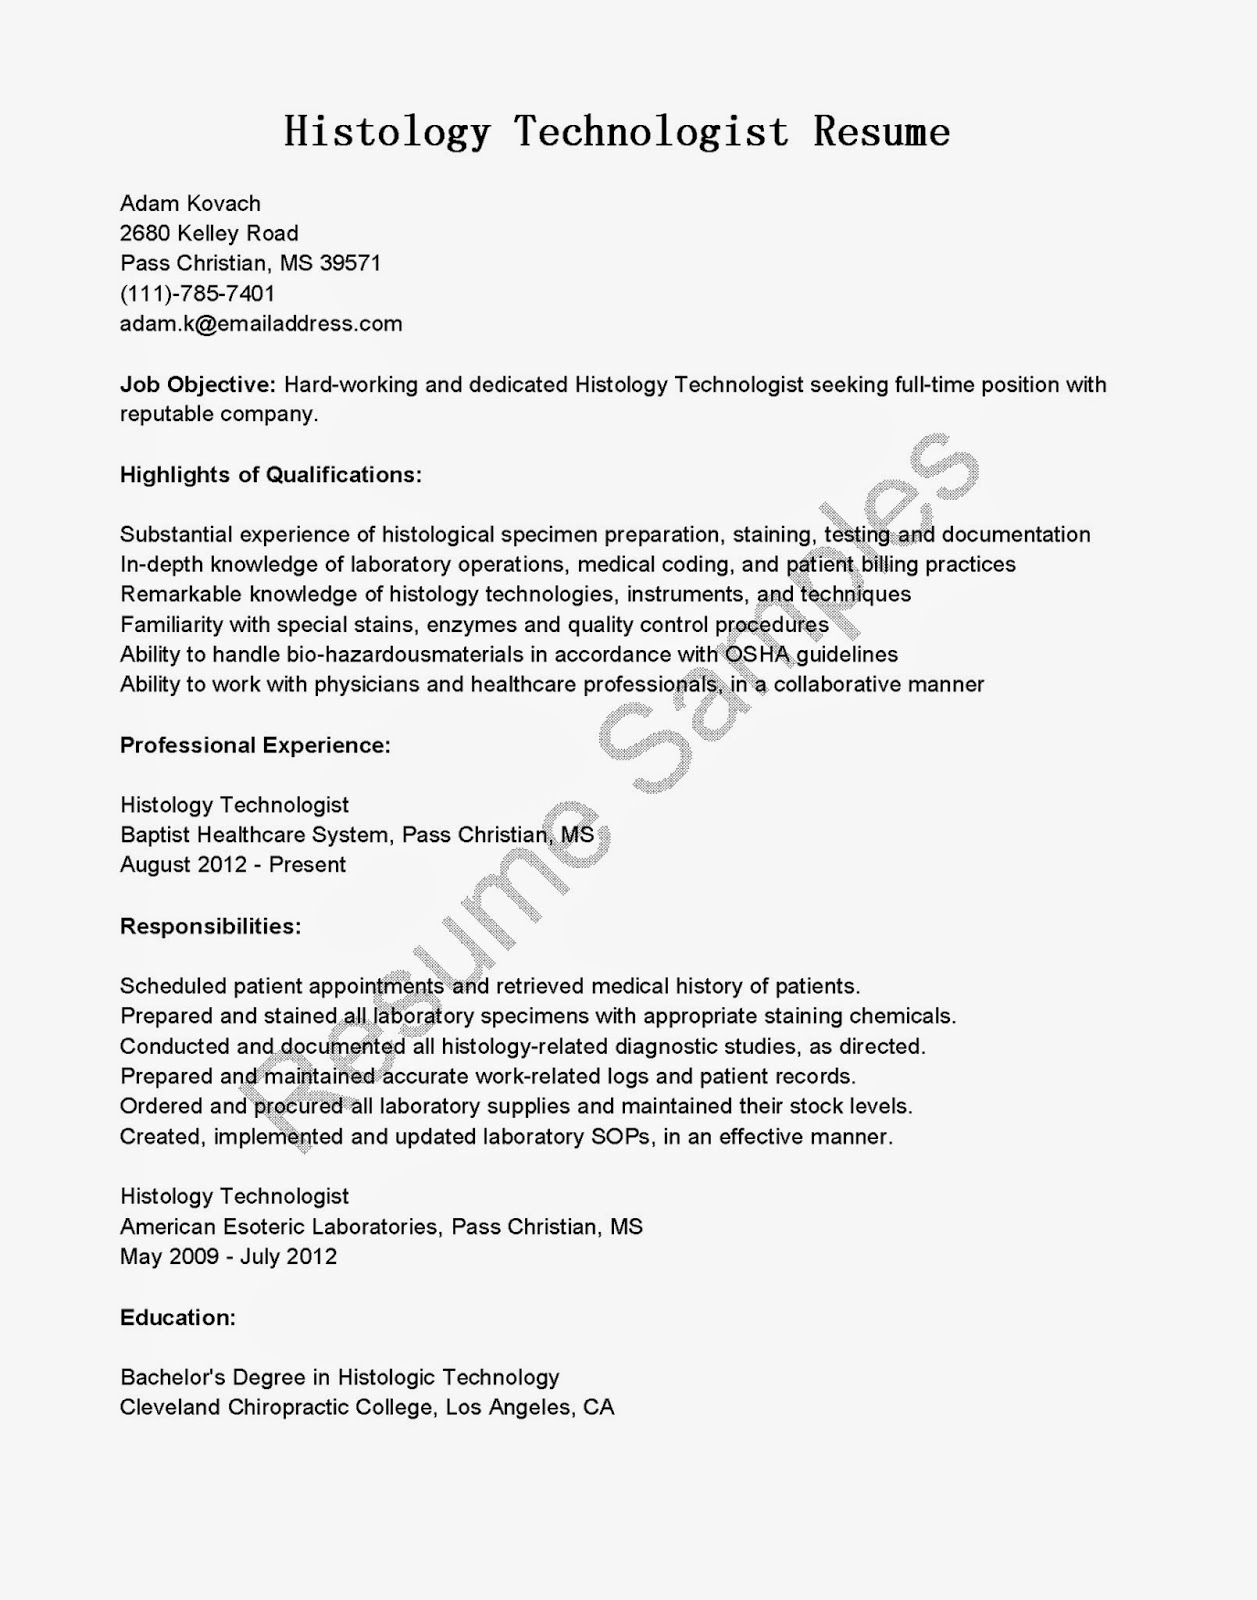 Clinical pharmacist resume template